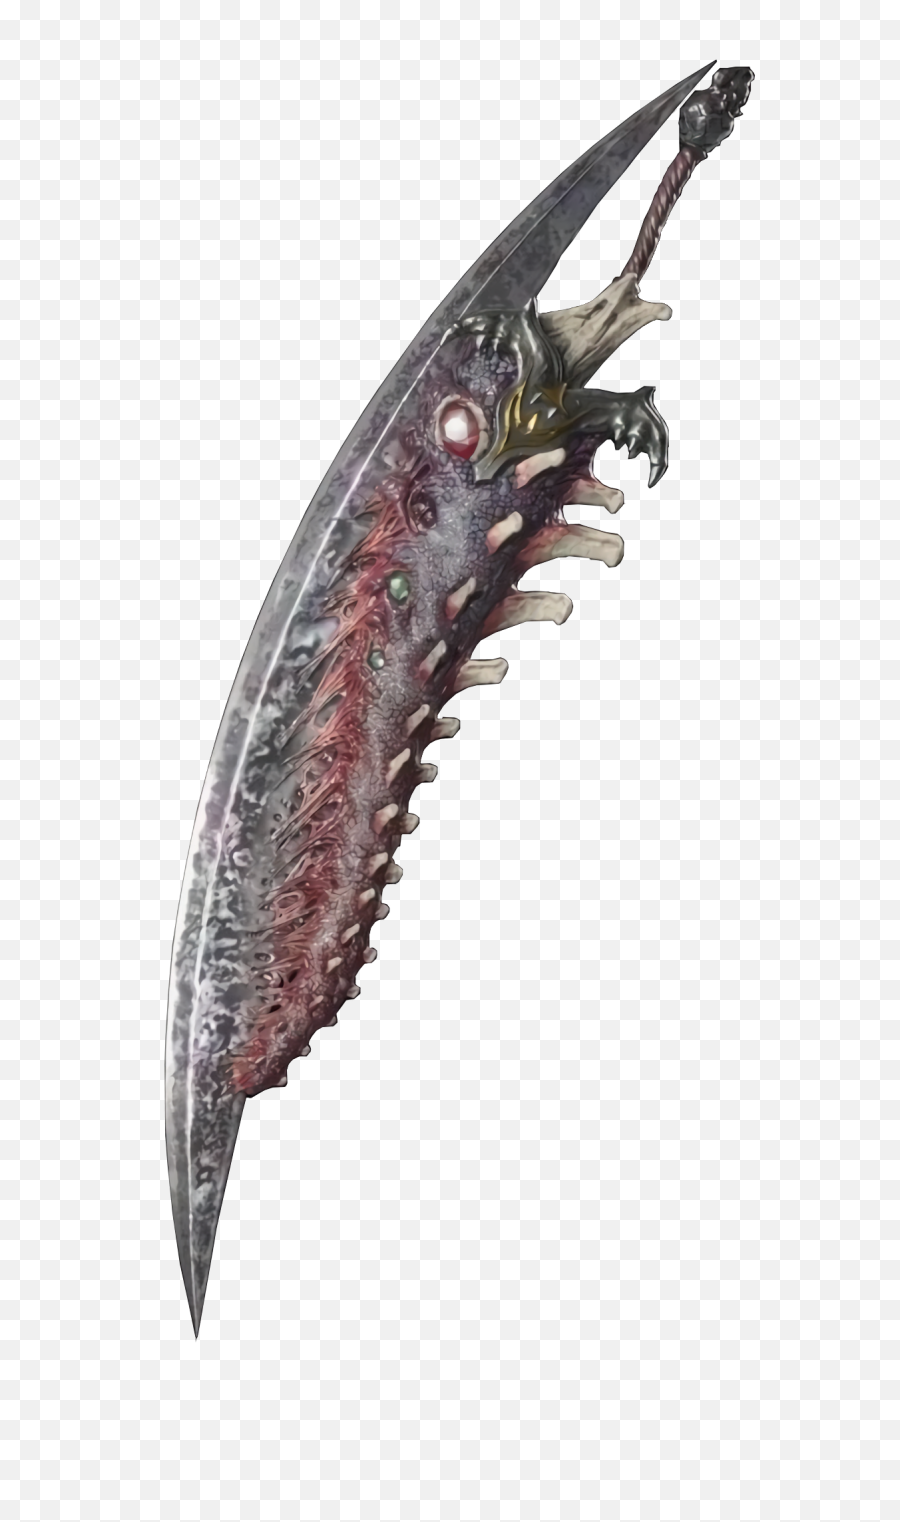 Devil May Cry 5 Sparda Sword - Devil May Cry Sparda Sword Png,Devil May Cry 5 Png